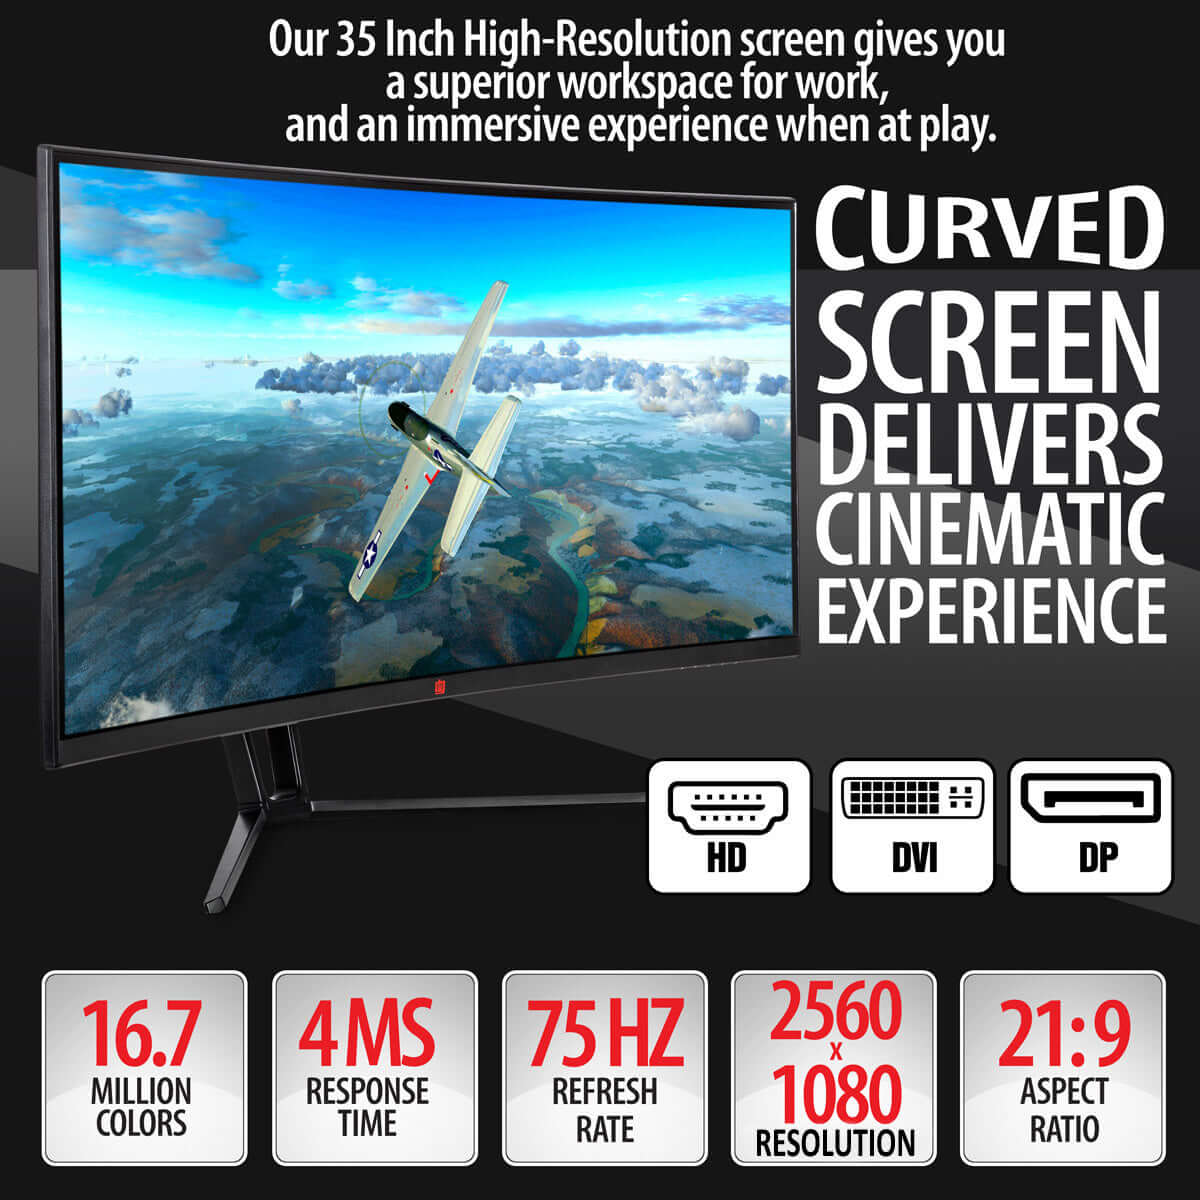 Deco Gear 35" Curved Ultrawide LED Gaming Monitor 21:9 Aspect Ratio, Crisp 2560 x 1080 Resolution, 16.7 Million Colors, 75 HZ Refresh Rate, 2000:1 Contrast Ratio, (HDMI, DVI, and DP Connections) - DecoGear